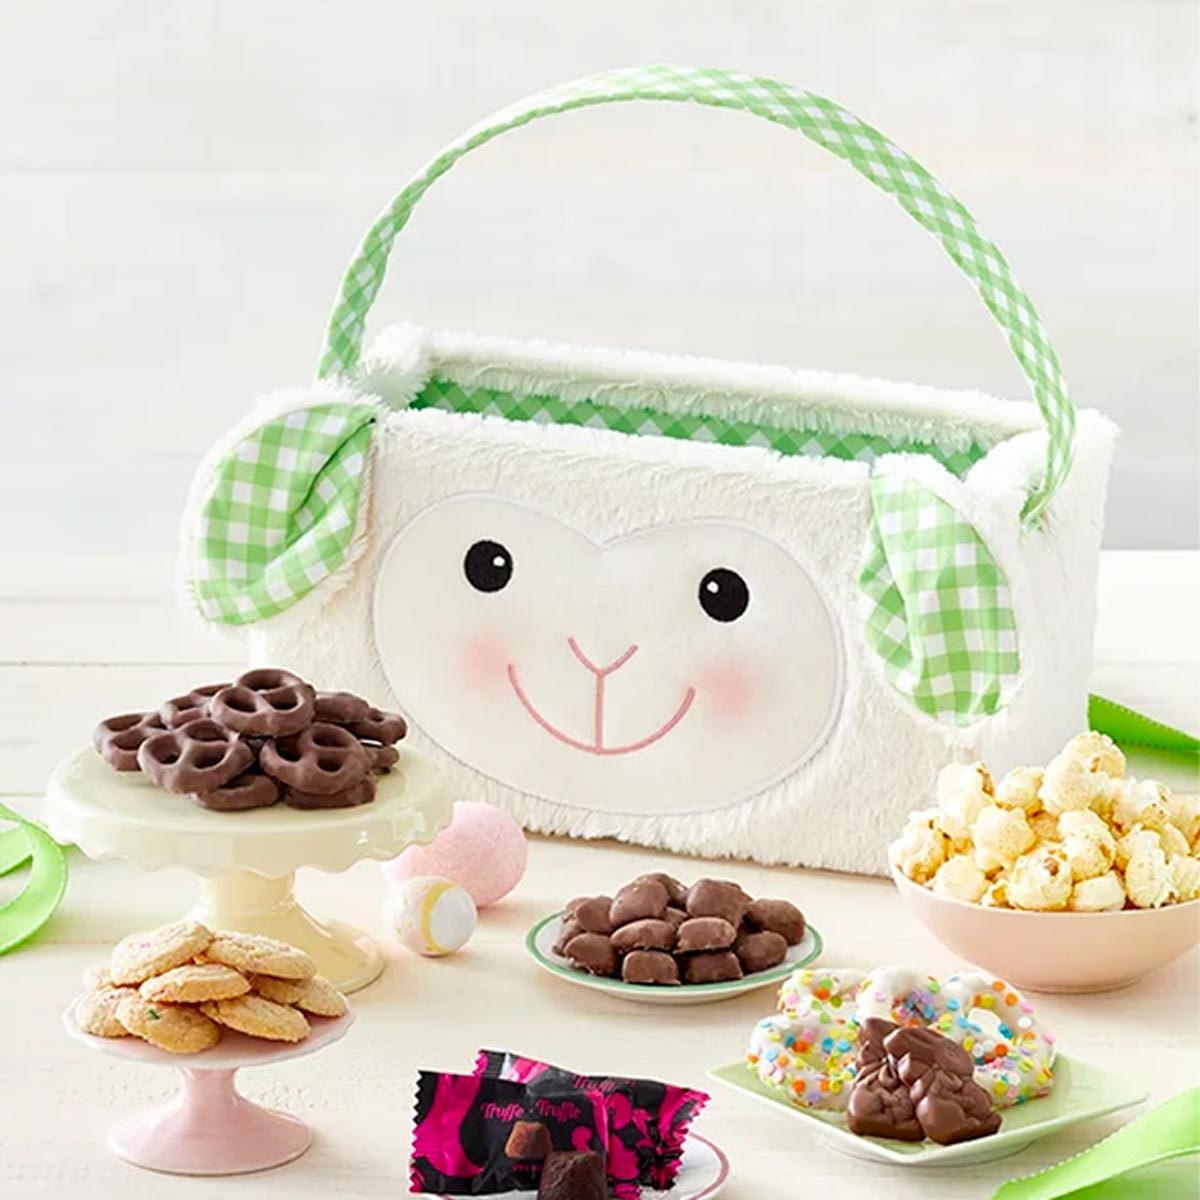 9 Greatest Premade Easter Baskets of 2023